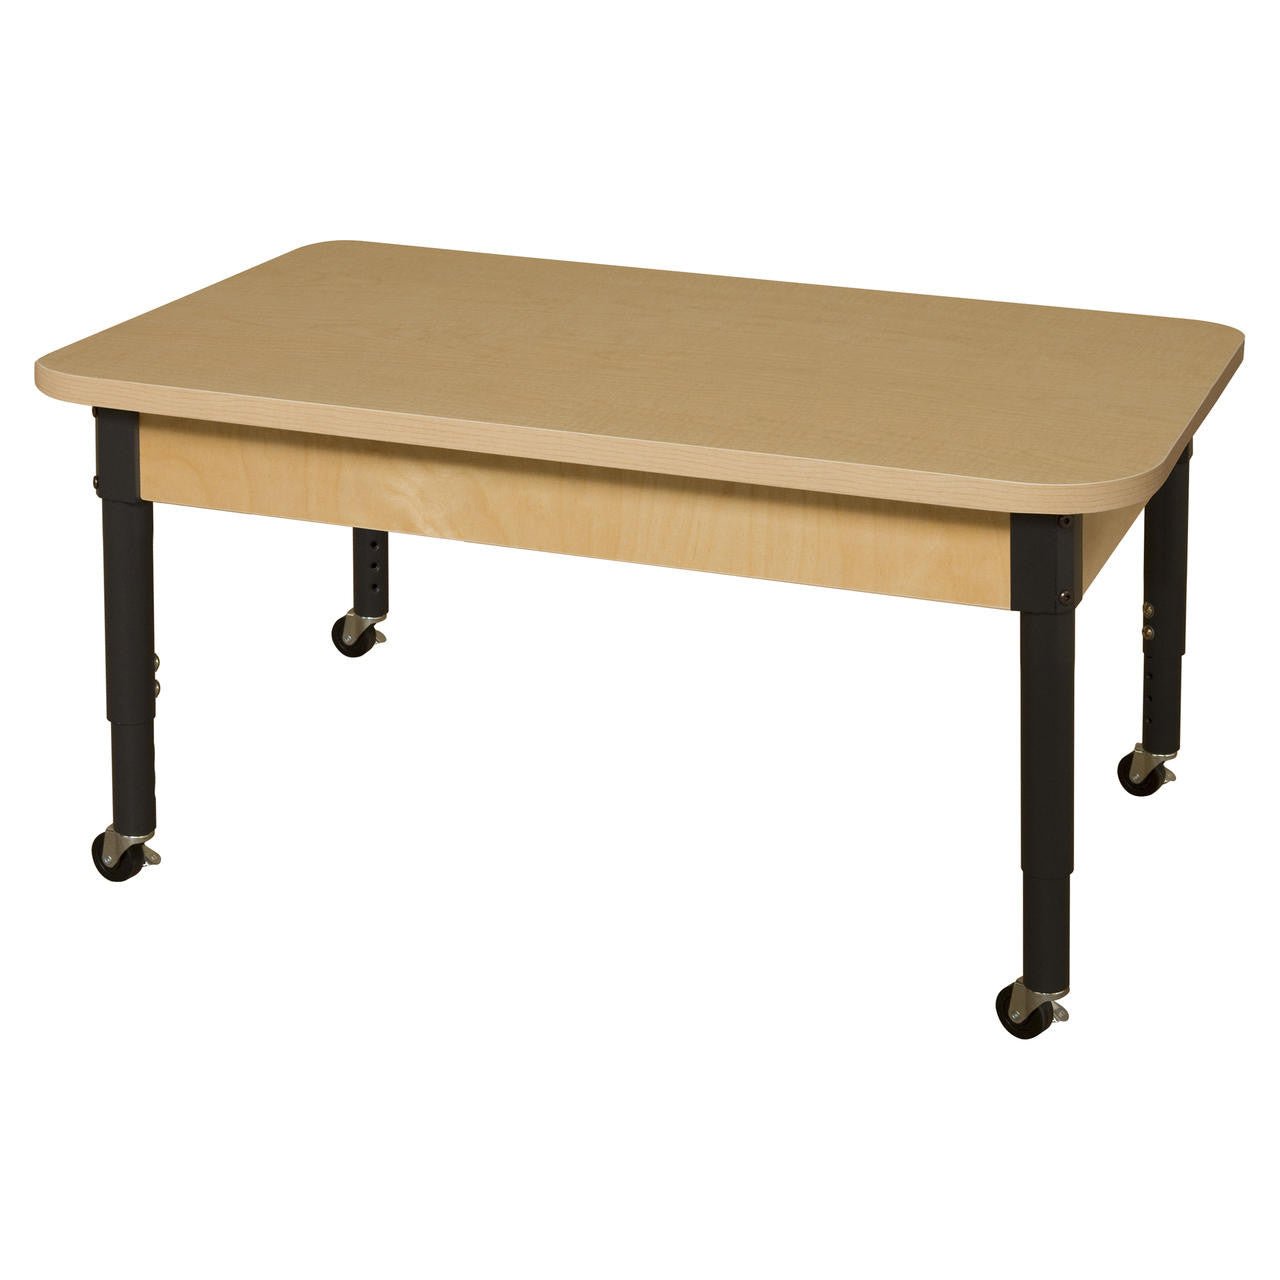 Mobile Rectangle High Pressure Laminate Table with Adjustable Legs 14-19"